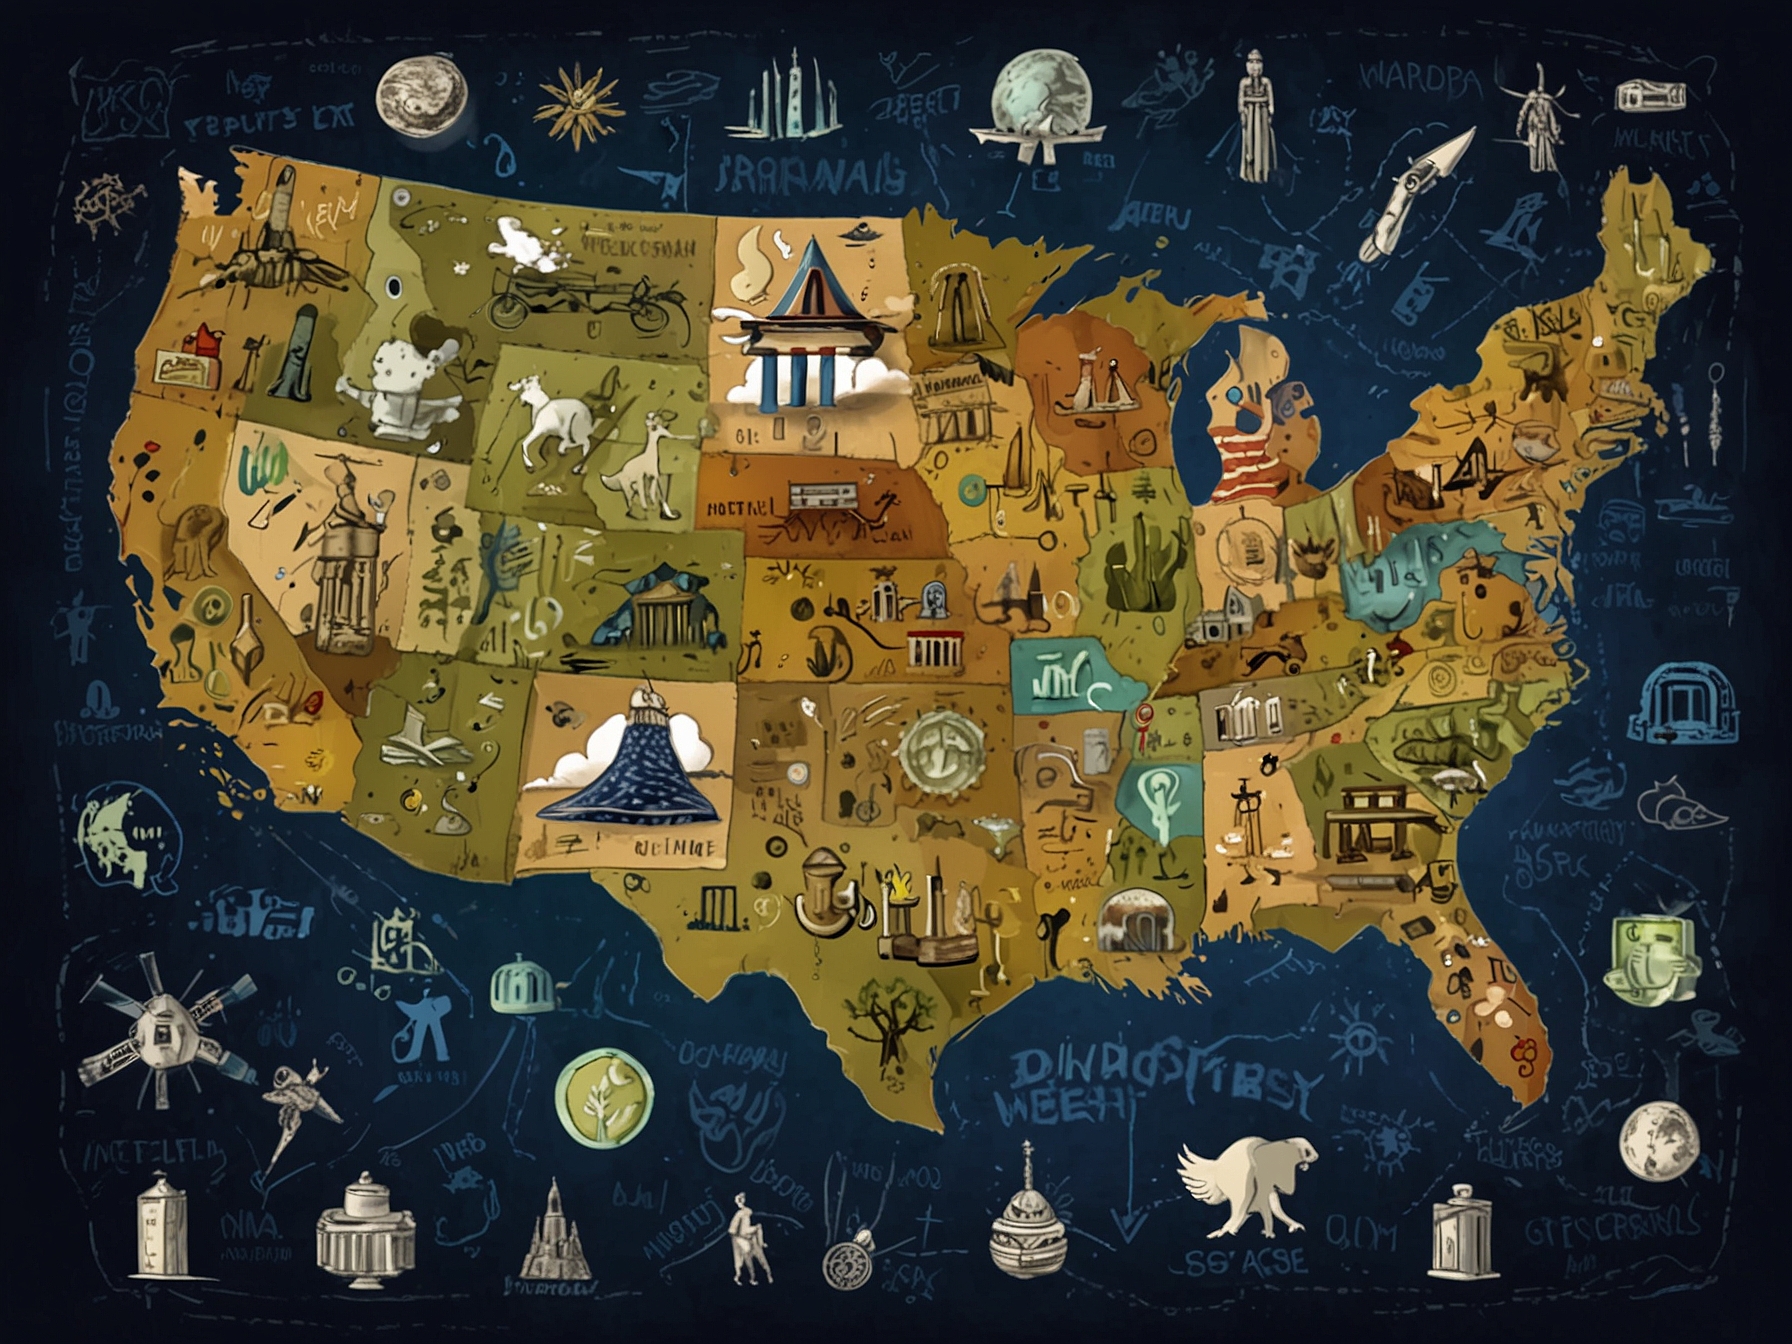 An illustration of the United States with various icons representing major industries such as technology, healthcare, and renewable energy, symbolizing its dominance in global investments.